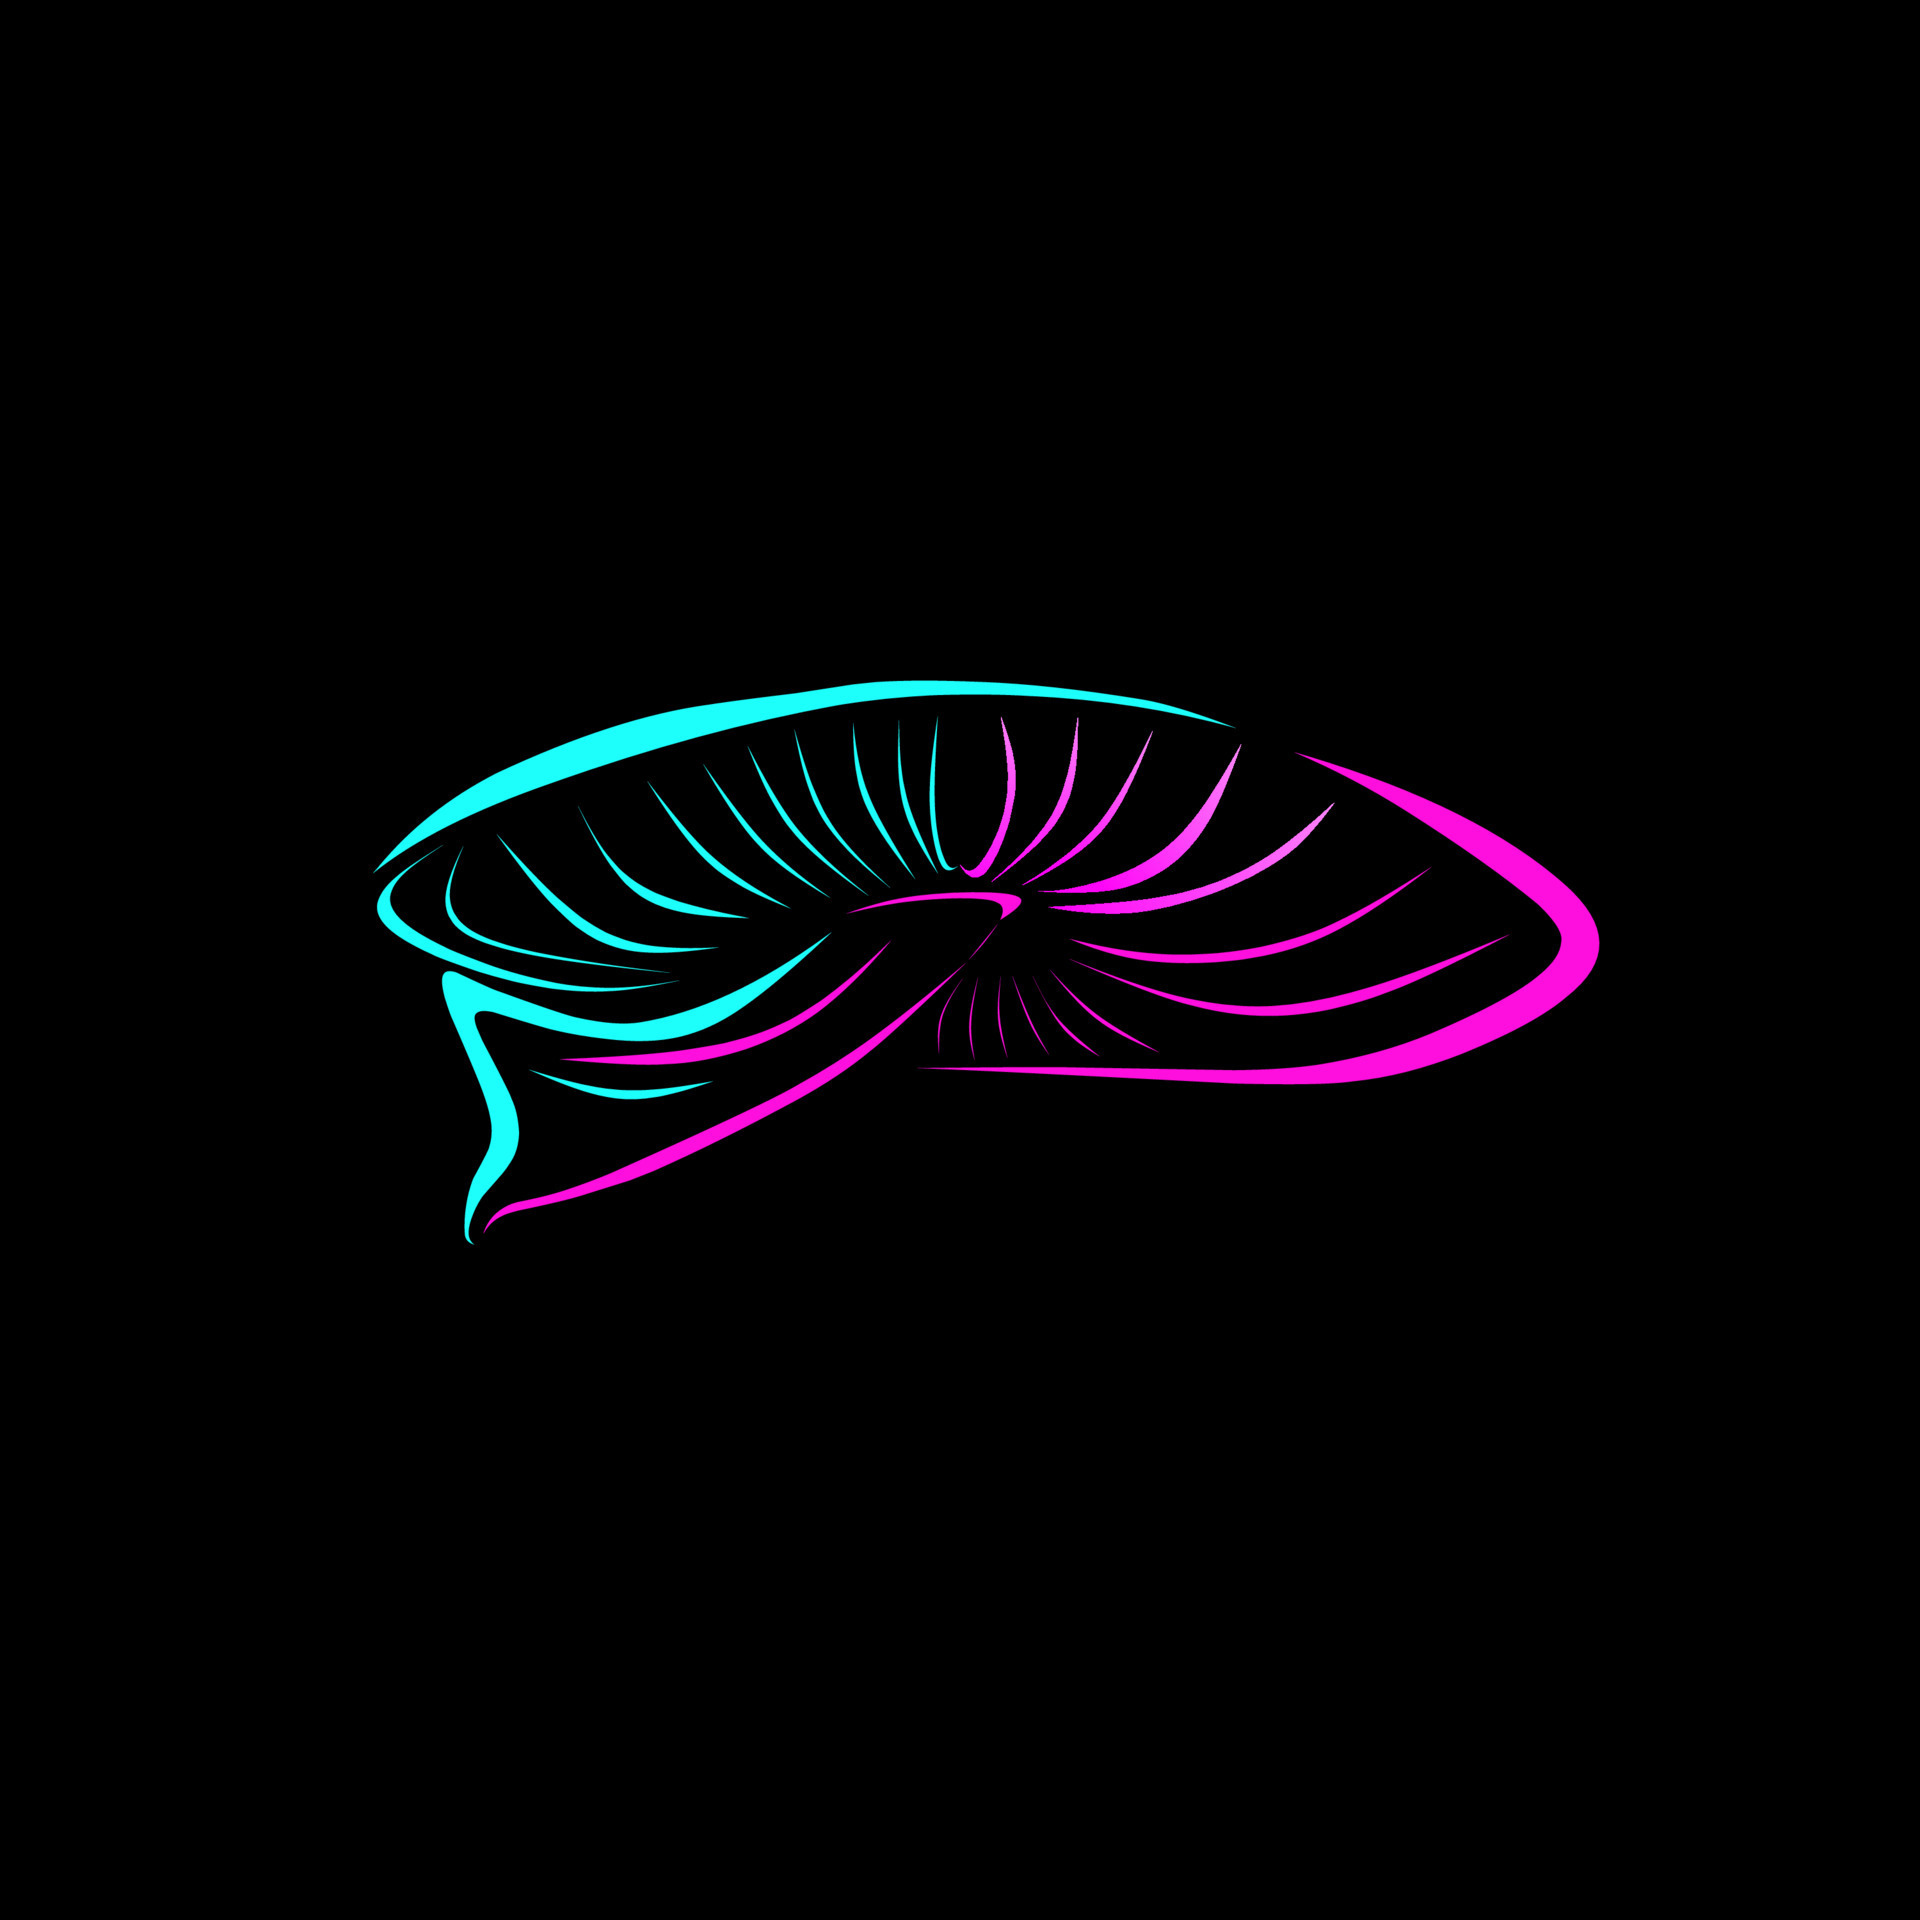 A neon colored logo with an abstract design - Alien